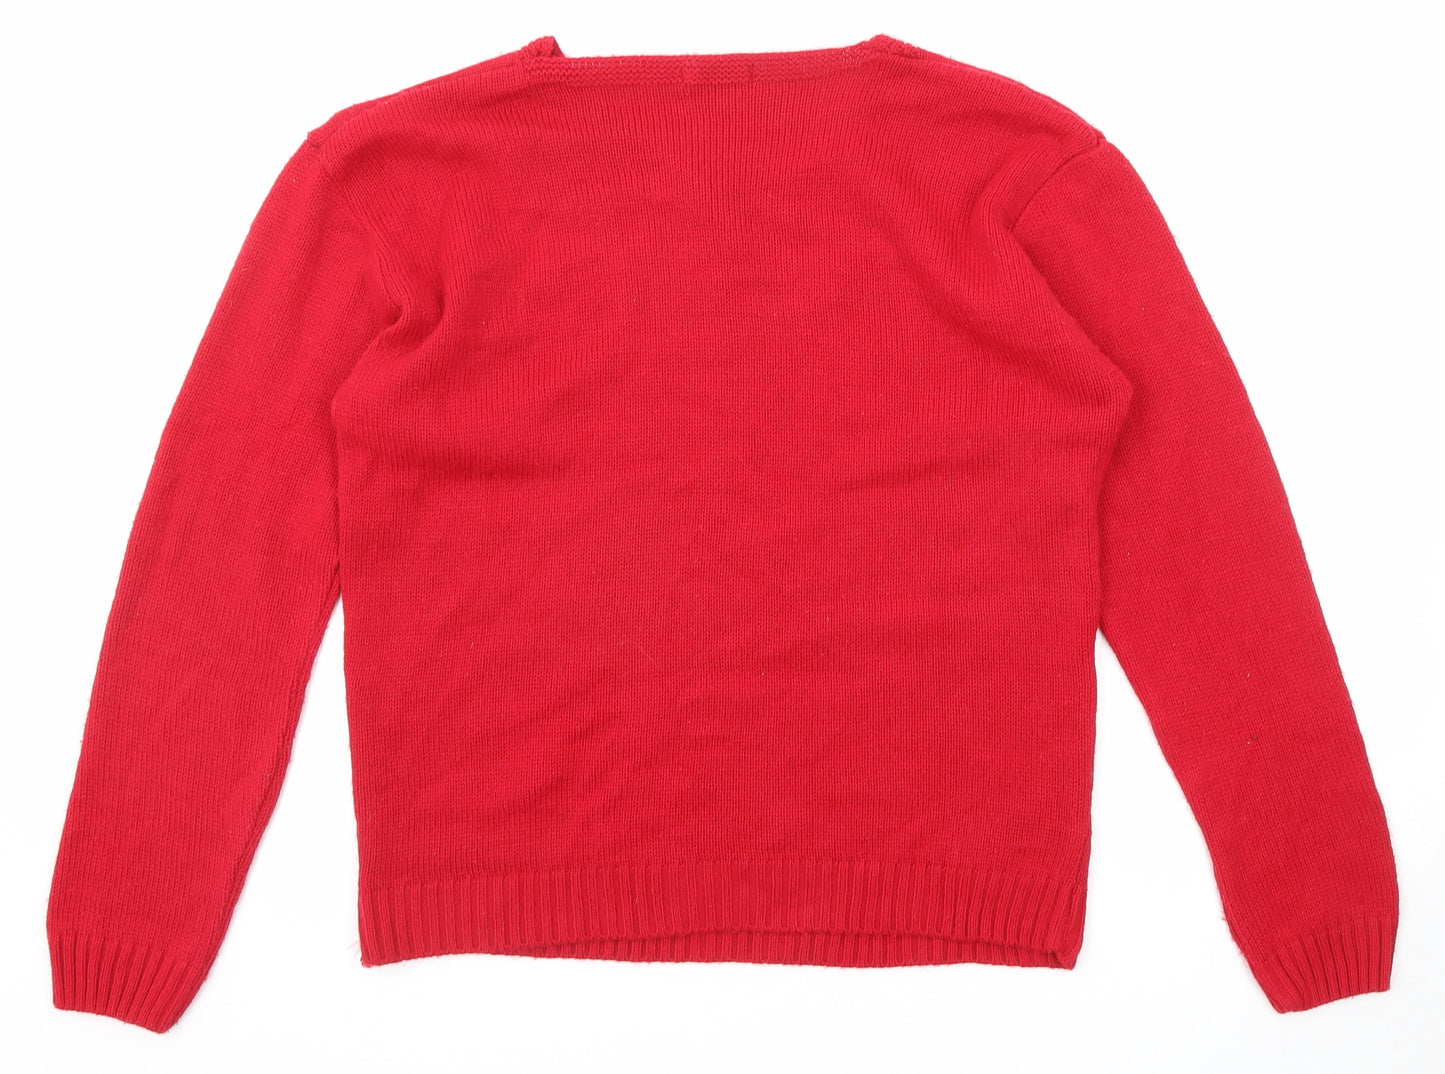 Pura Moda Womens Red Round Neck Acrylic Pullover Jumper Size M - Size M-L Santa Claus Christmas